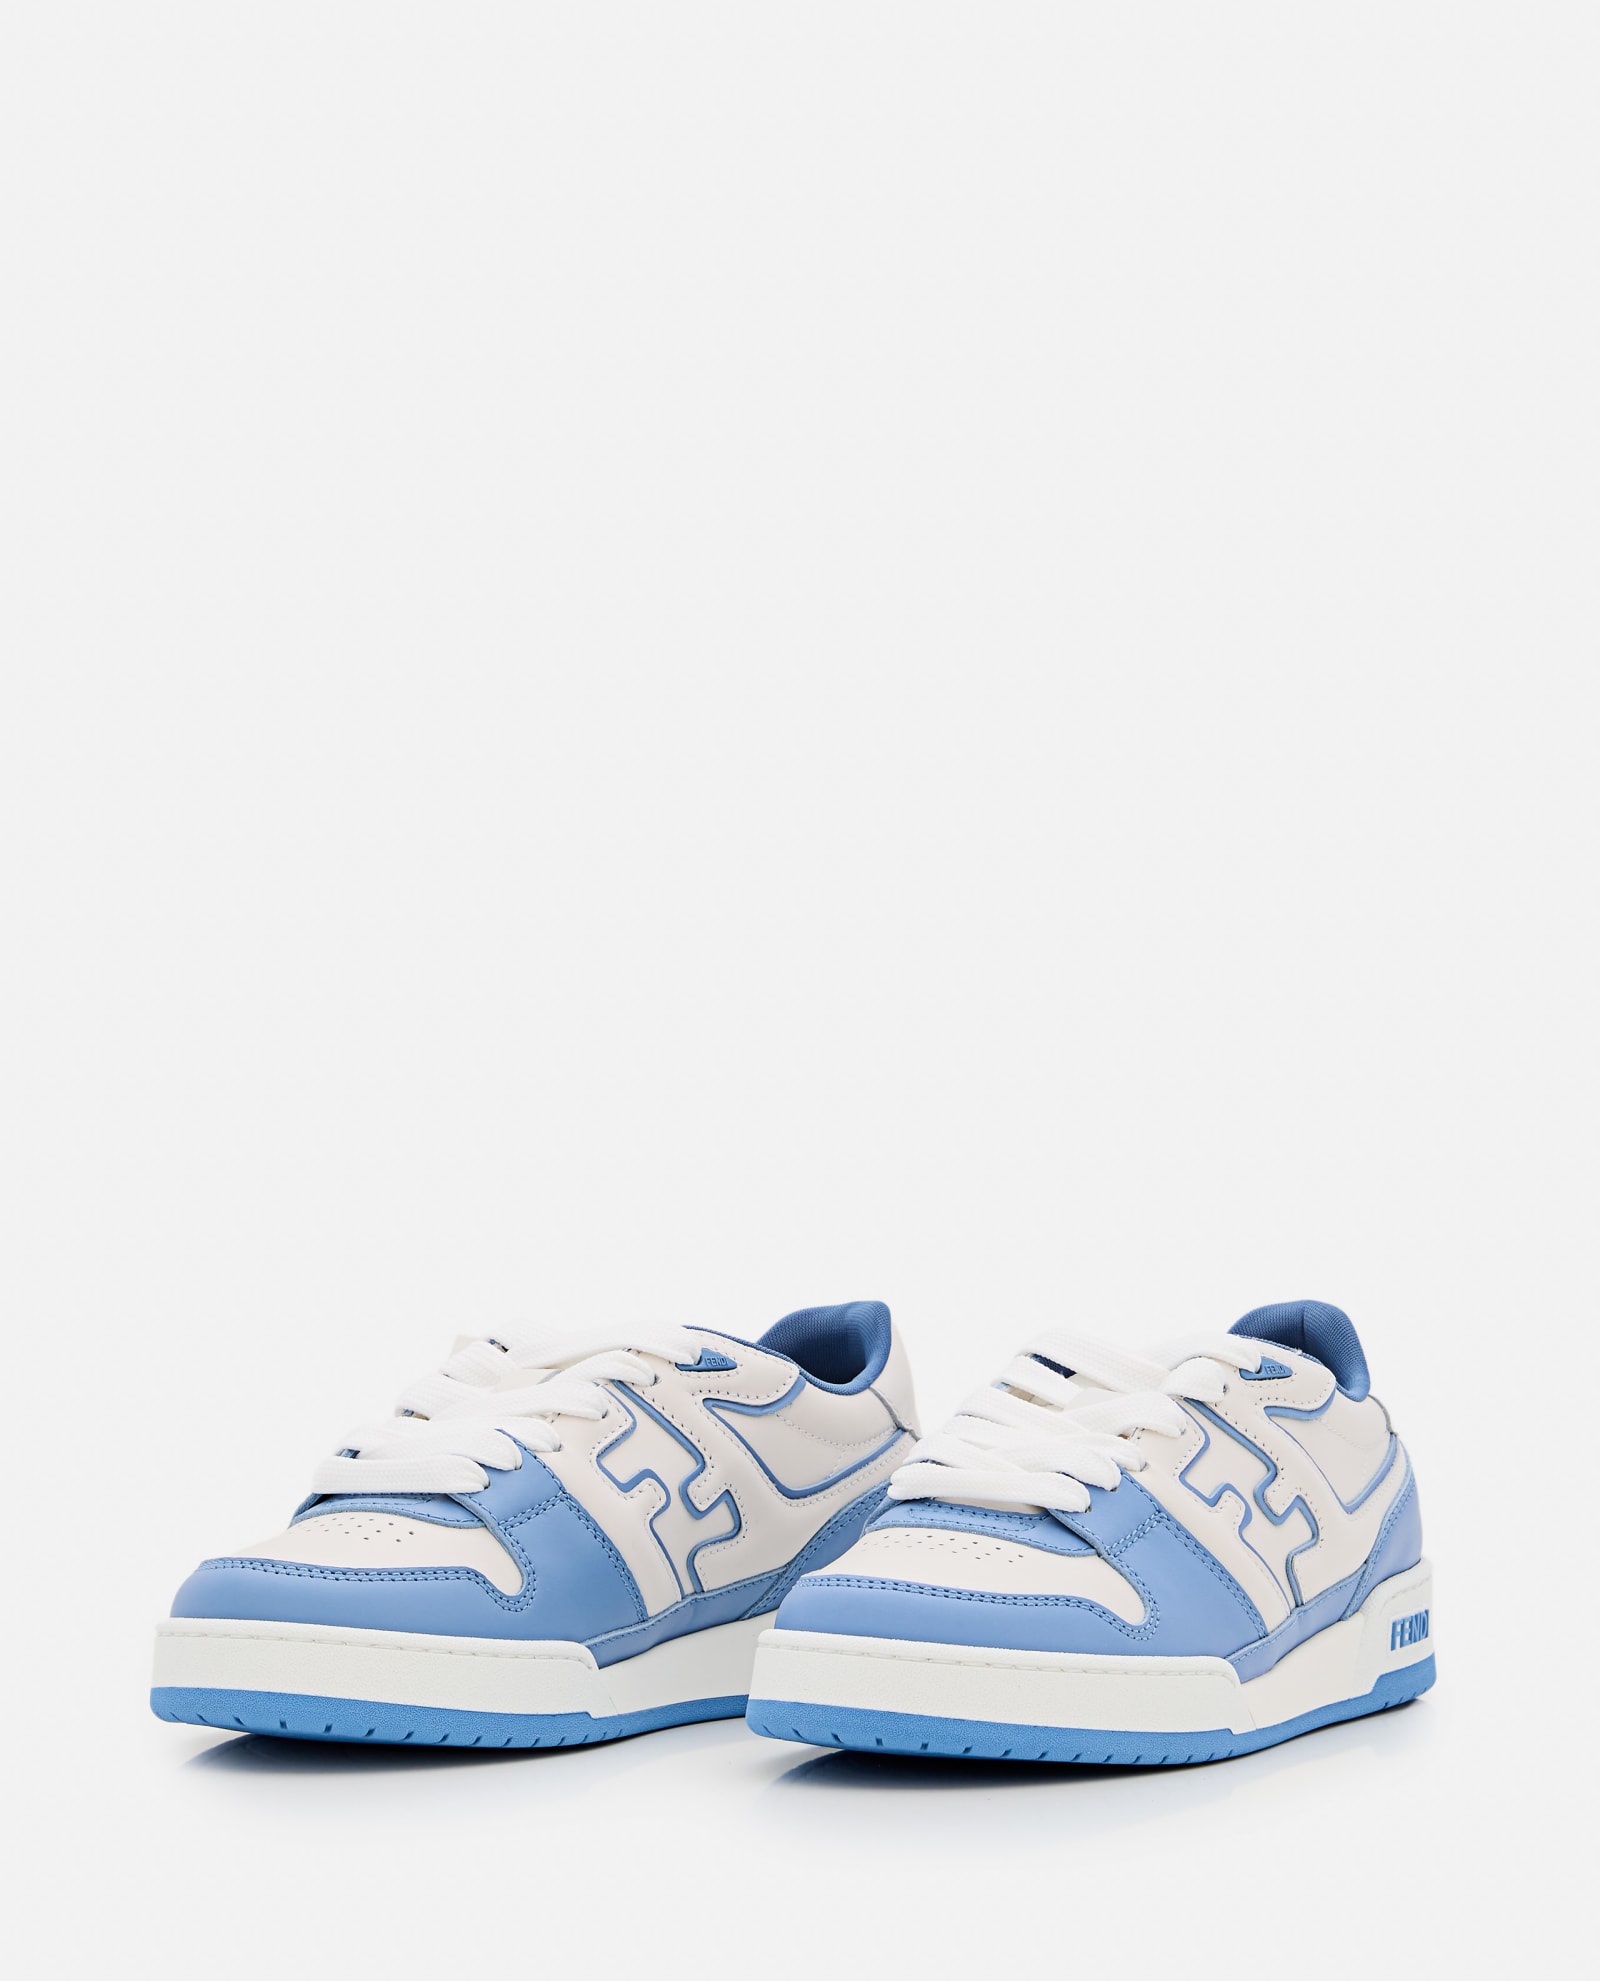 Shop Fendi Lace Up Leather Sneakers In White